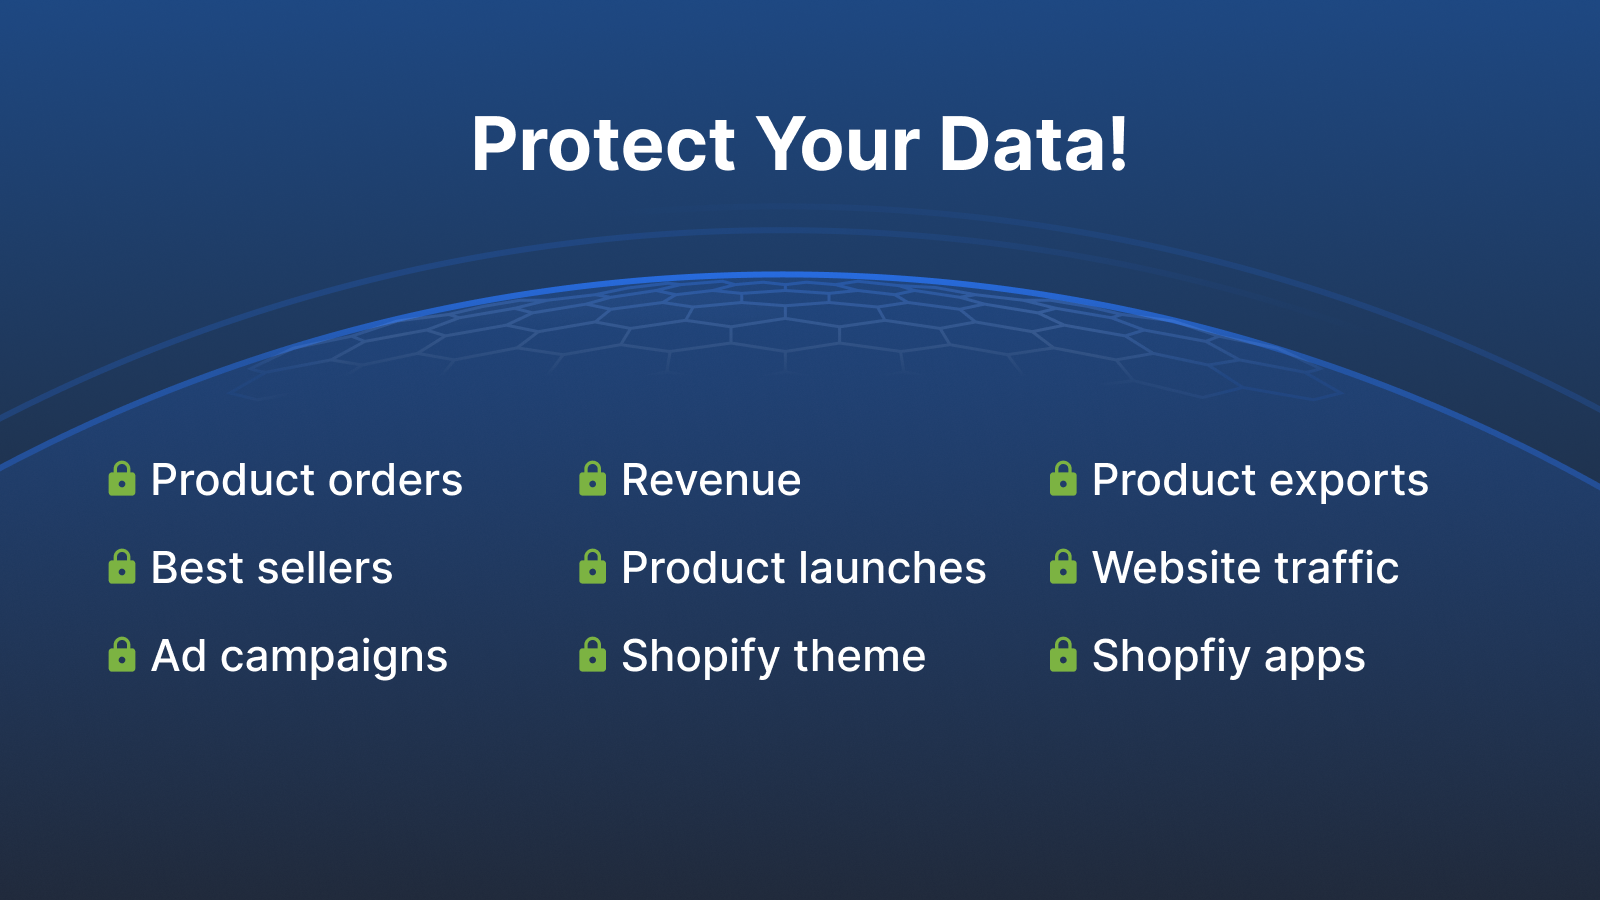 Keep your store's data safe